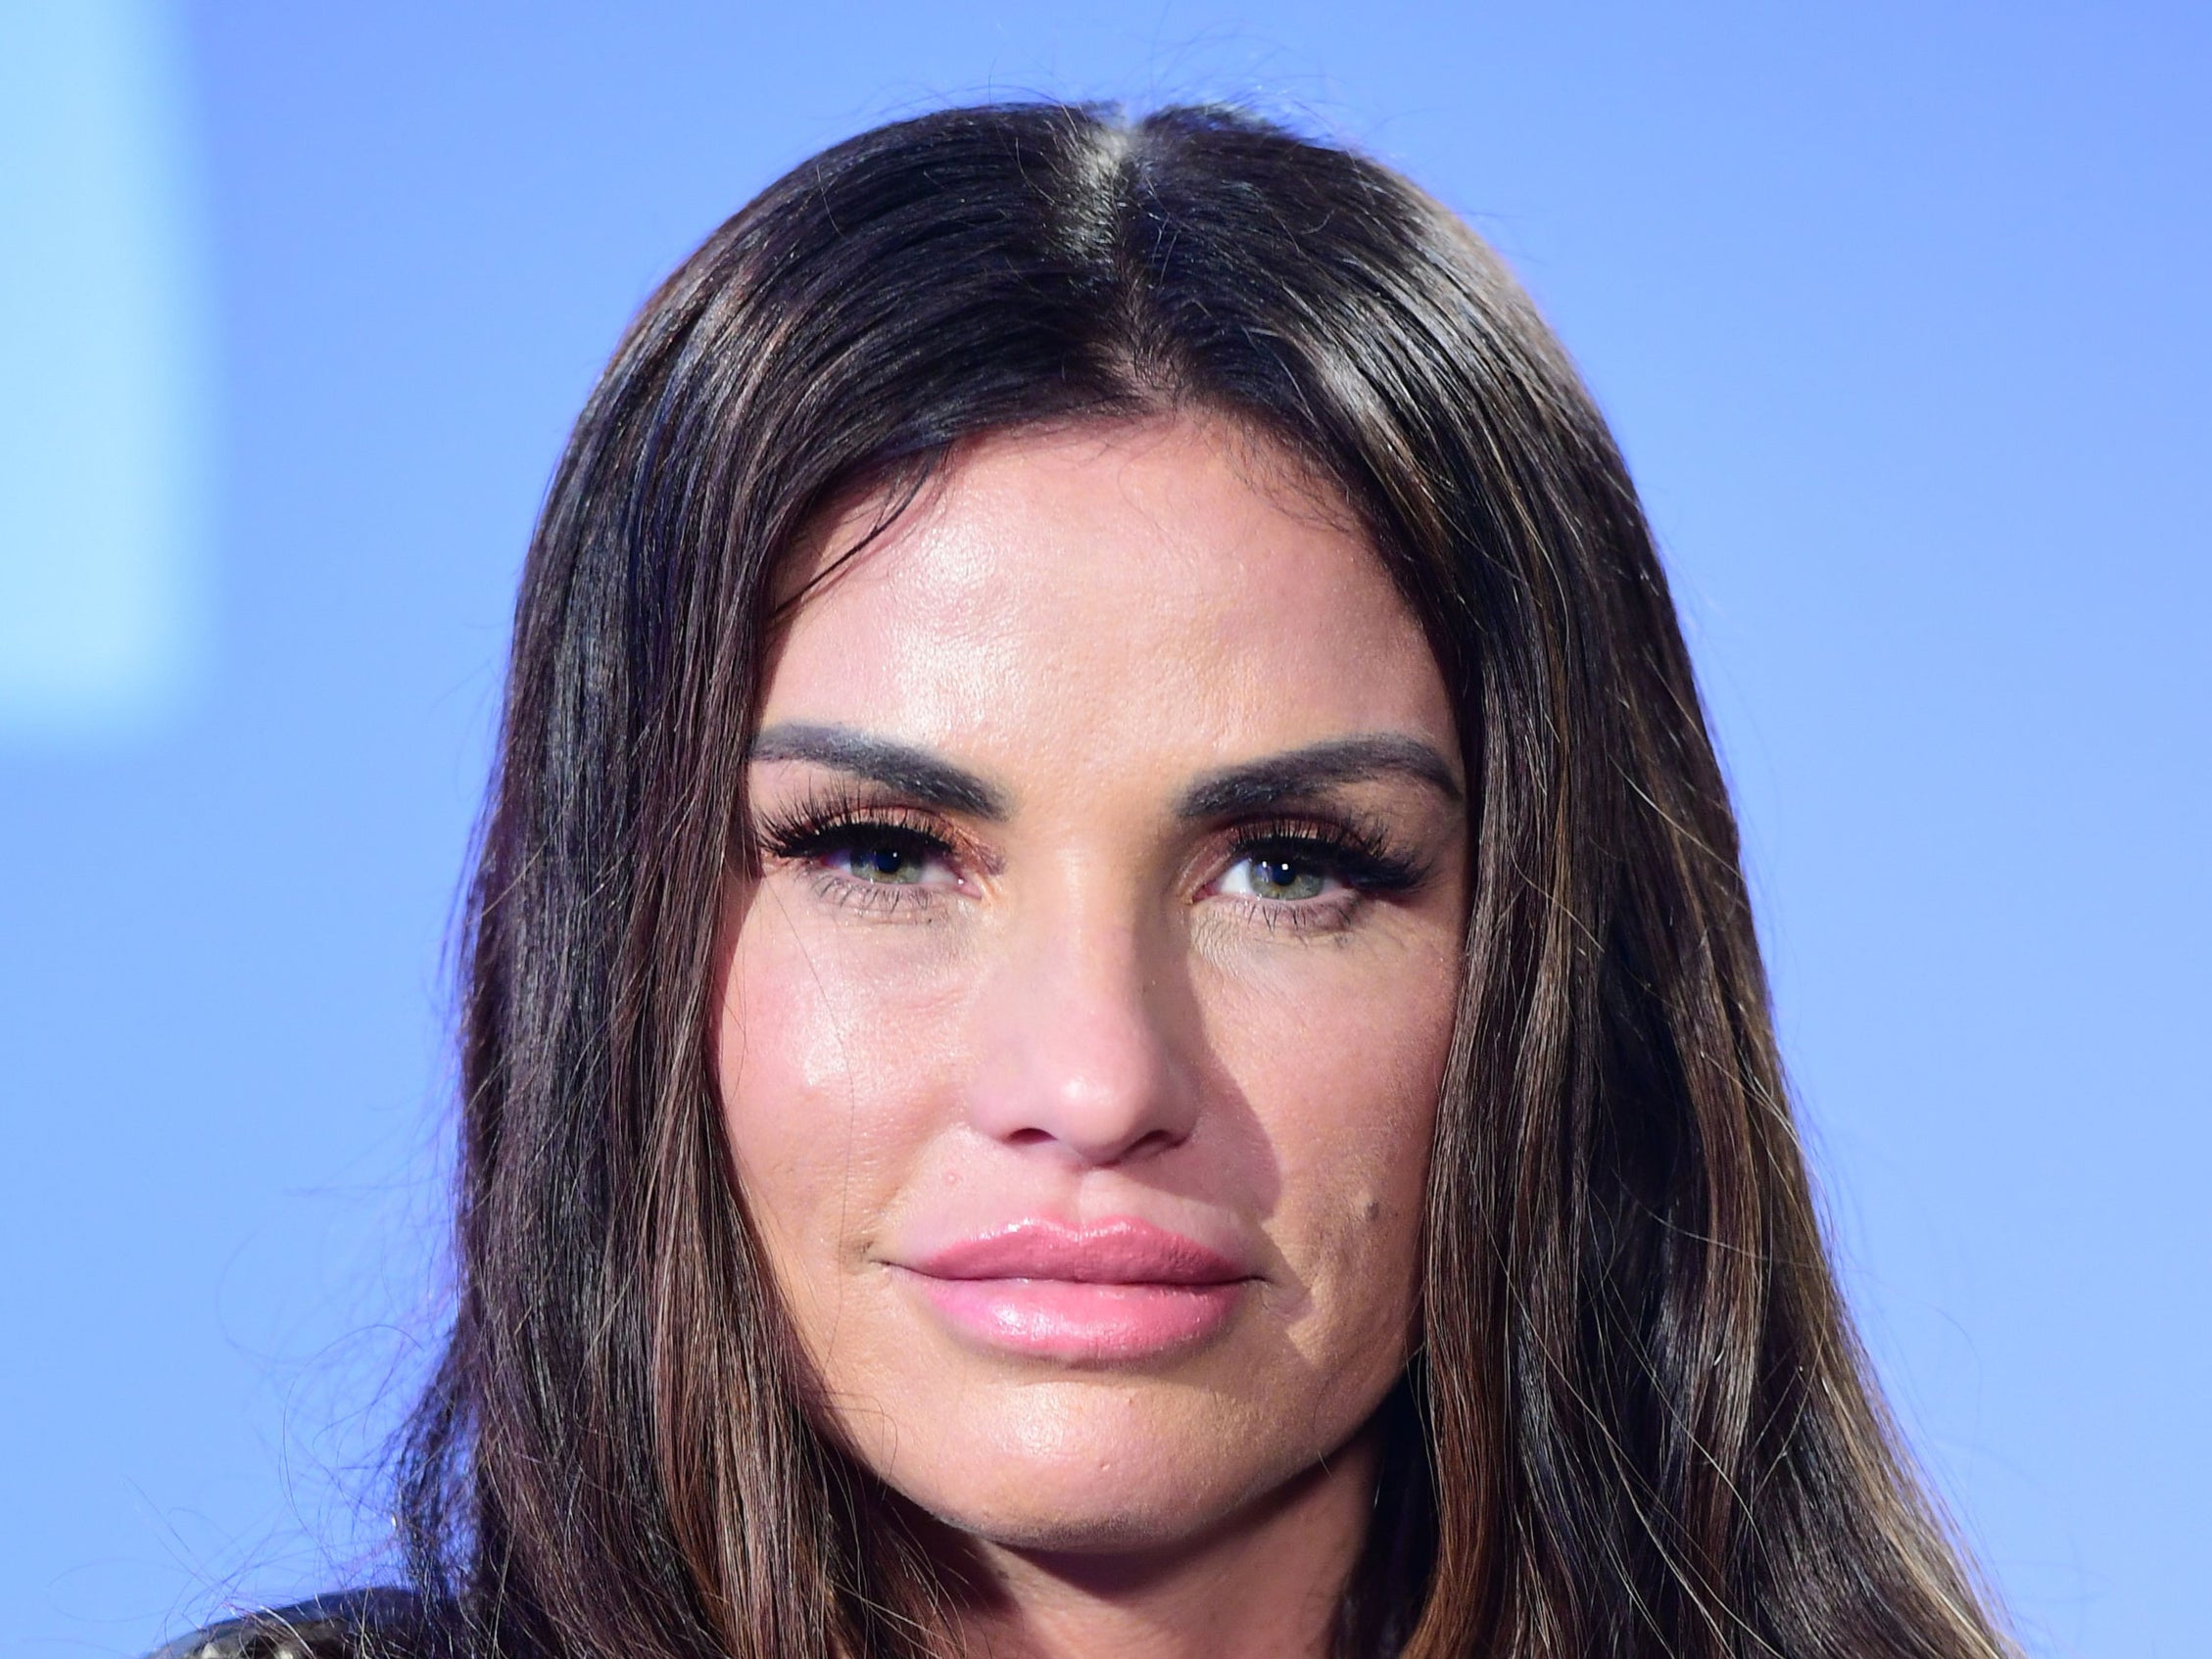 Katie Price charged with driving offences as family post ‘concerned and worried’ message on her Instagram